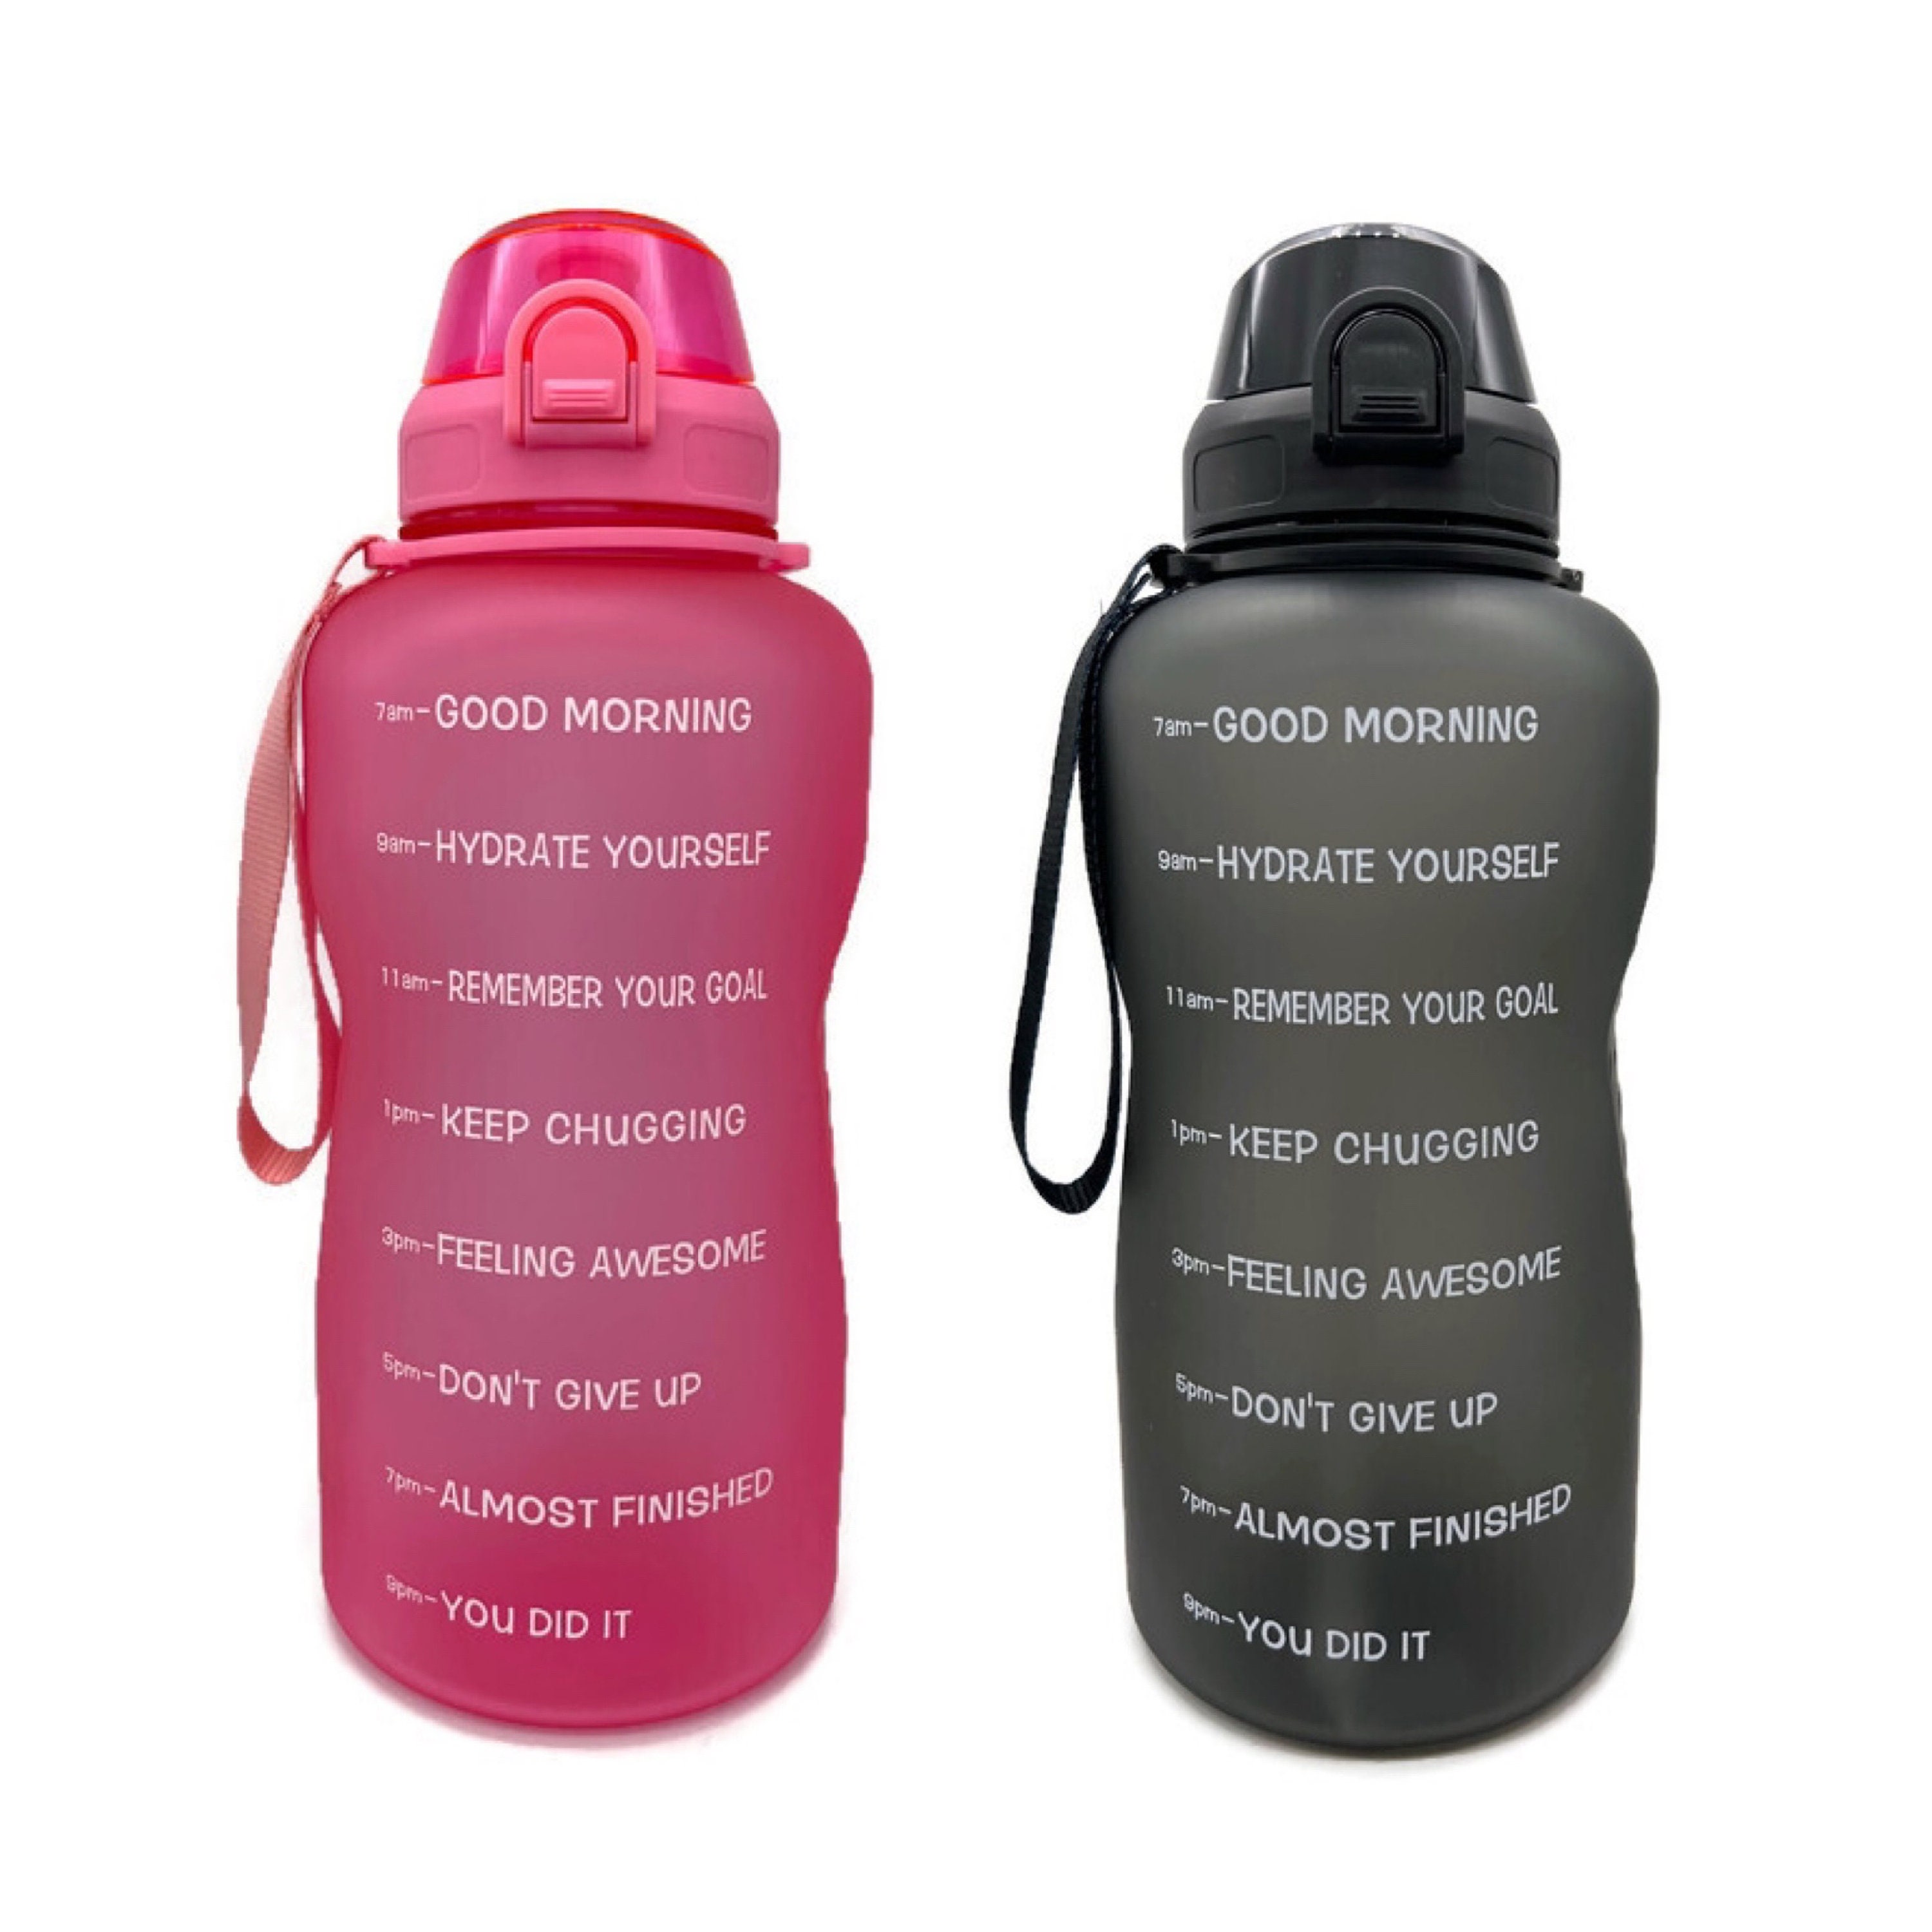 1/2 Gallon Water Bottle 64oz Motivational Sports Bottles With Straw Travel  Wellness Half Large Cool Drink Jug Reusable Hiking Waterbottle 